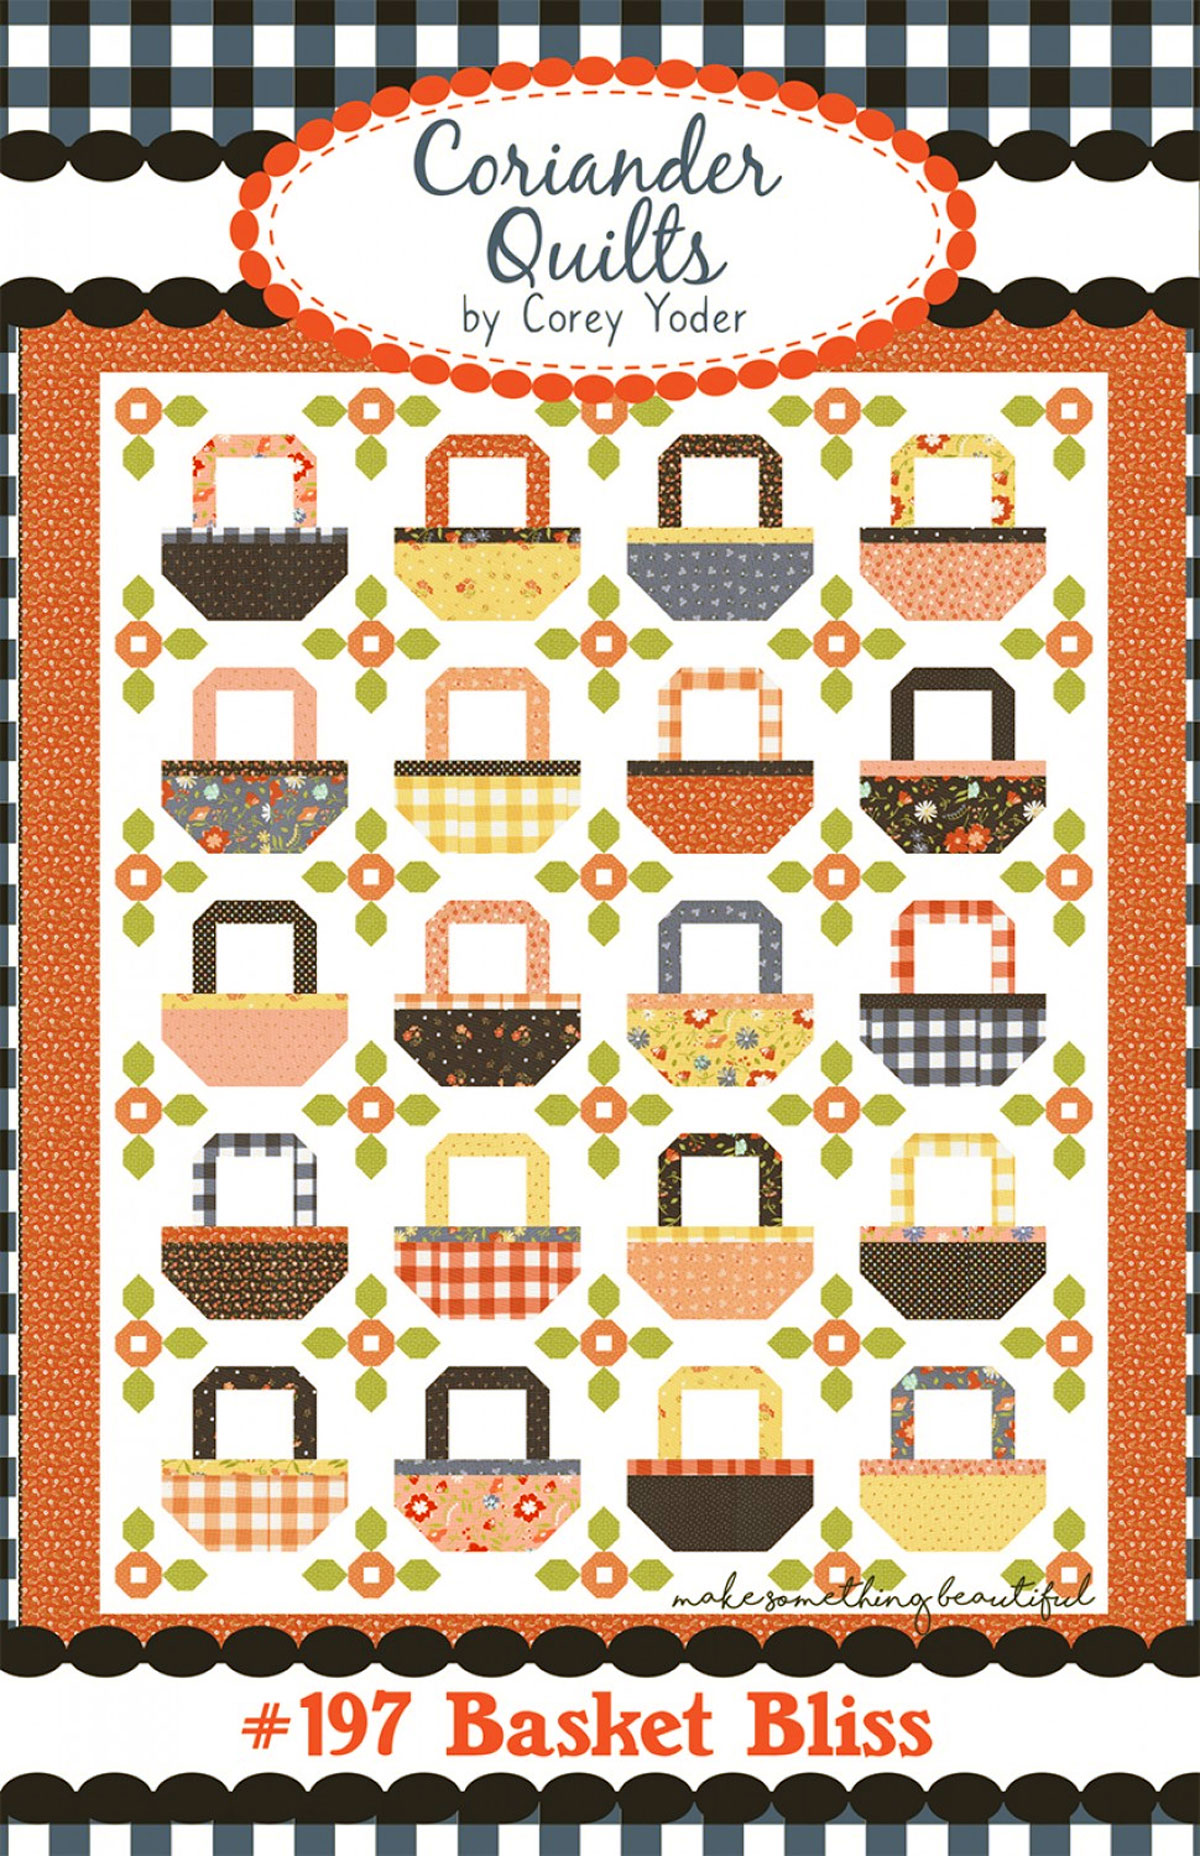 Basket-Bliss-quilt-sewing-pattern-Coriander-Quilts-front